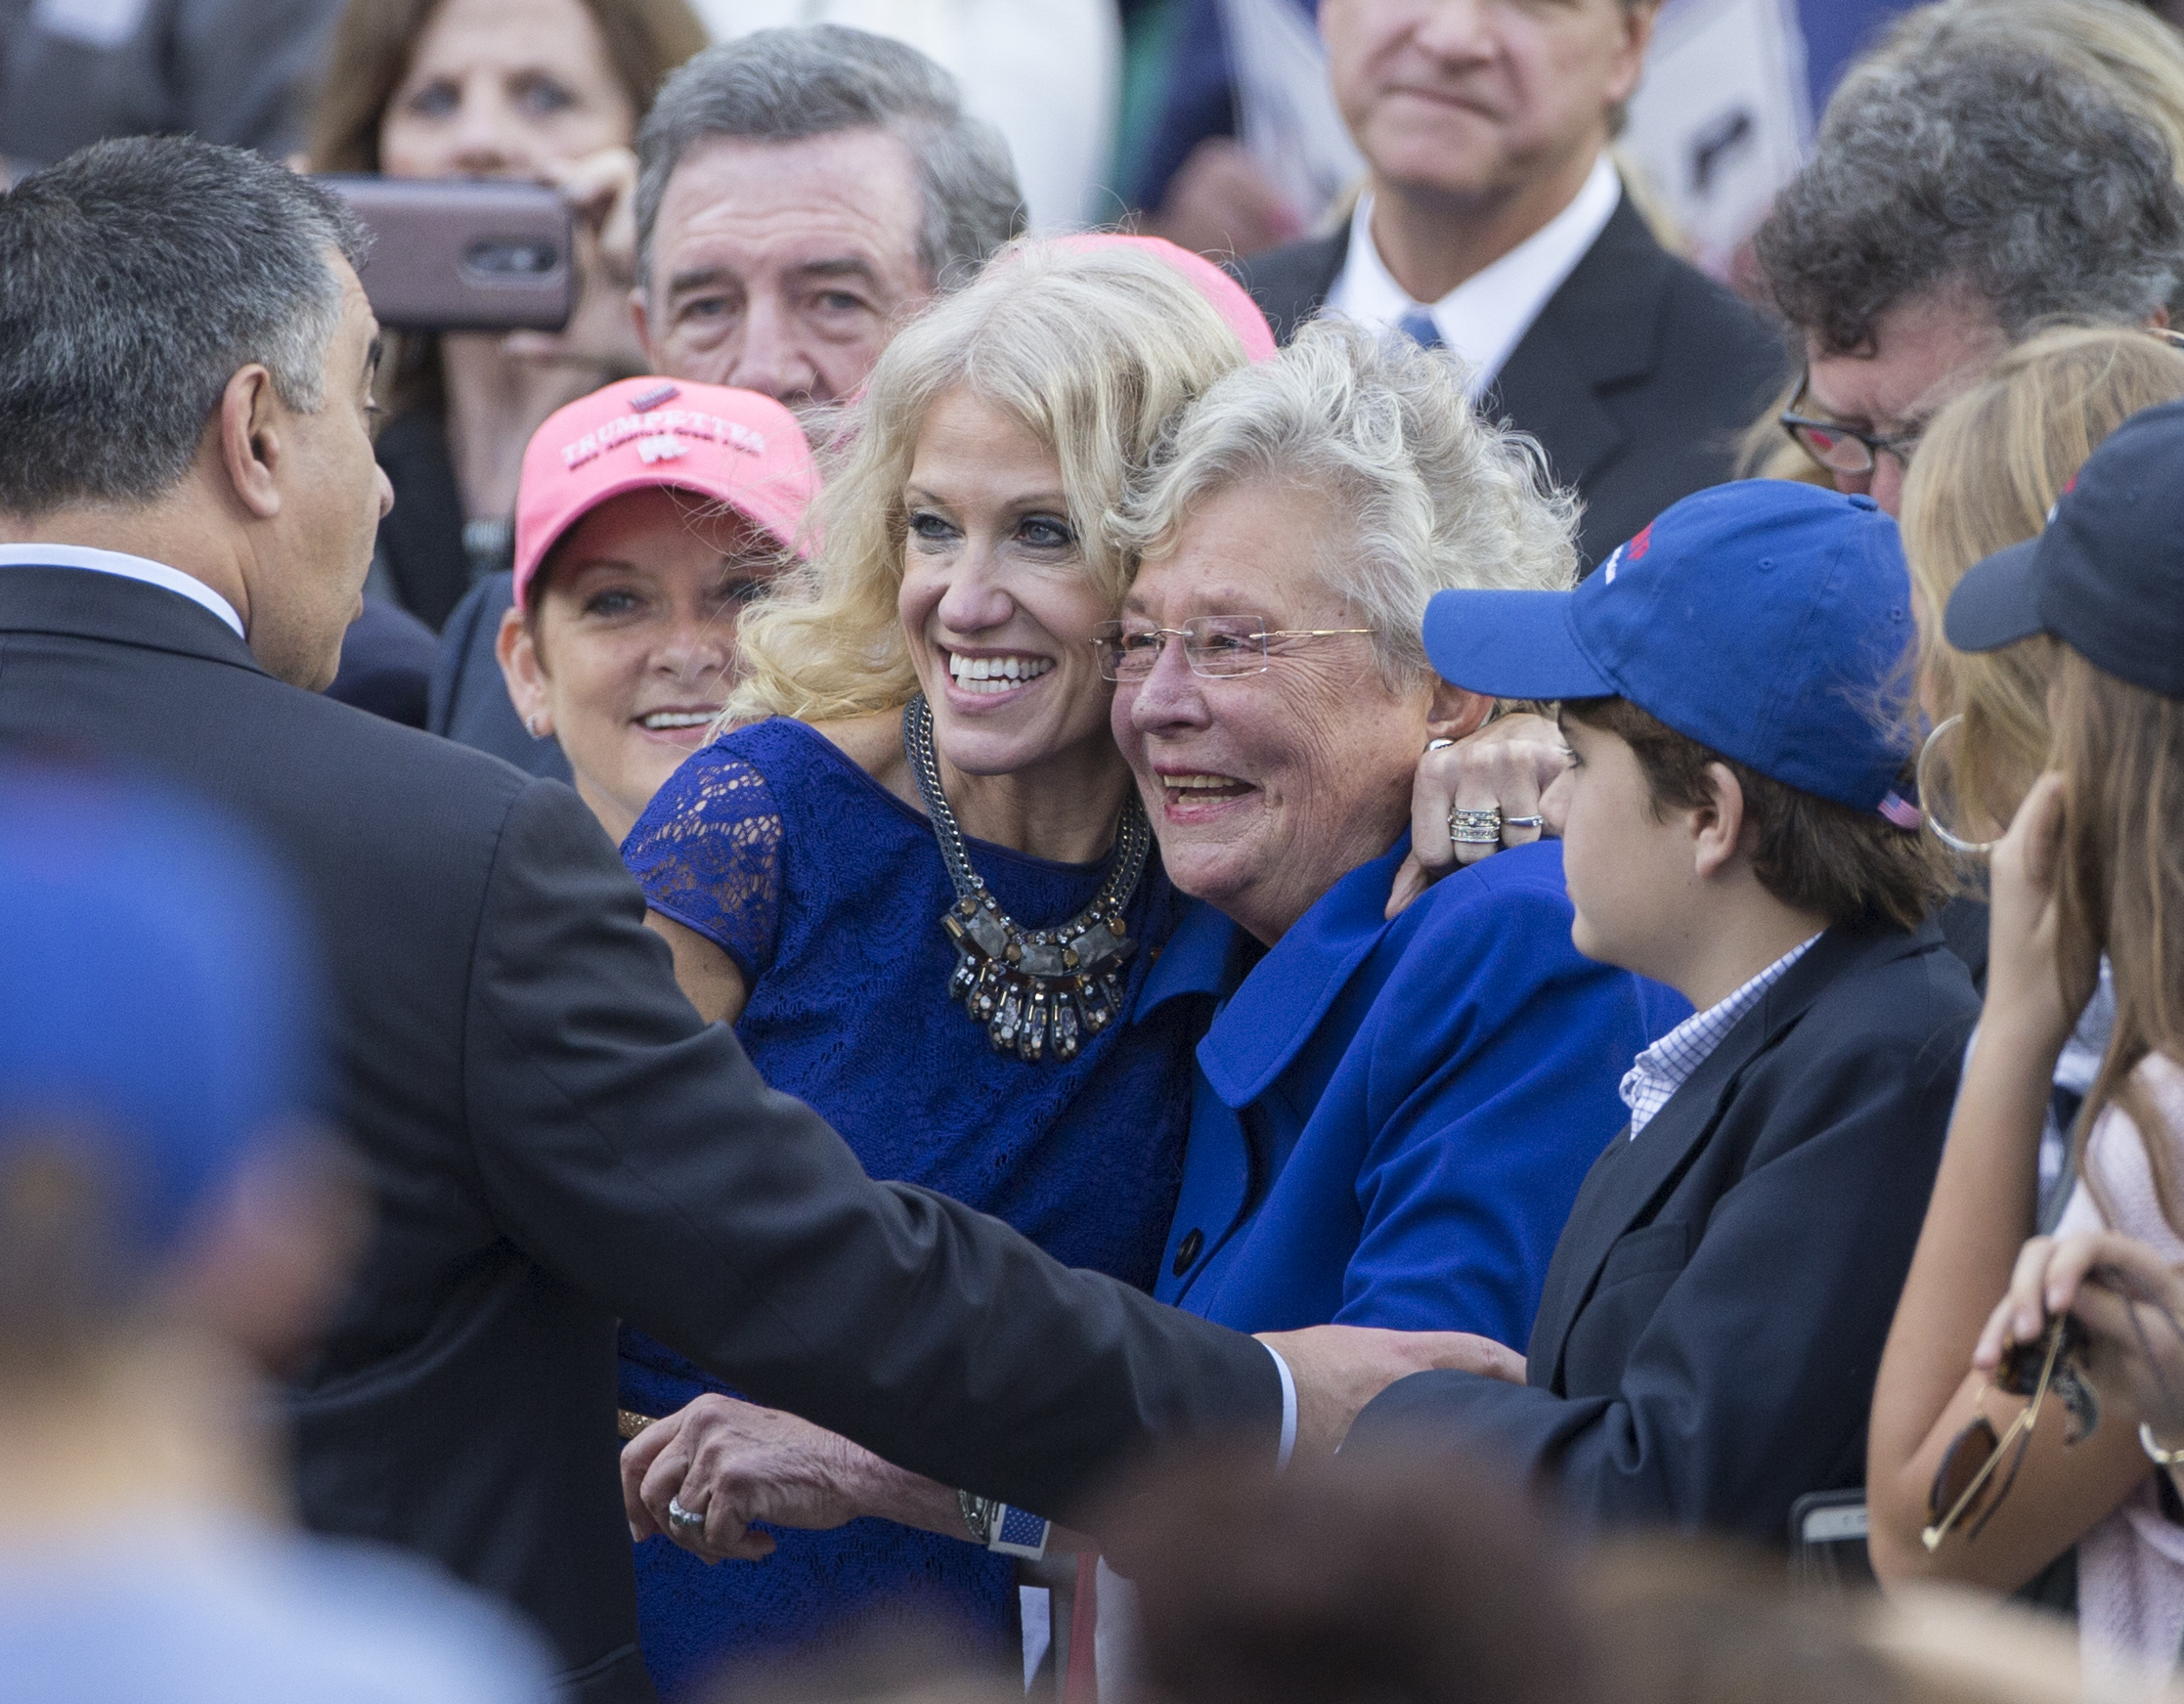 MOBILE, AL - DECEMBER 17: President-elect Donal Trump's campaign manager Kellyanne Conway, left, poses for photos with Alabama Lieutenant Governor Kay Ivey during a thank you rally in Ladd-Peebles Stadium on December 17, 2016 in Mobile, Alabama. President-elect Trump has been visiting several states that he won, to thank people for their support during the U.S. election. (Photo by Mark Wallheiser/Getty Images)